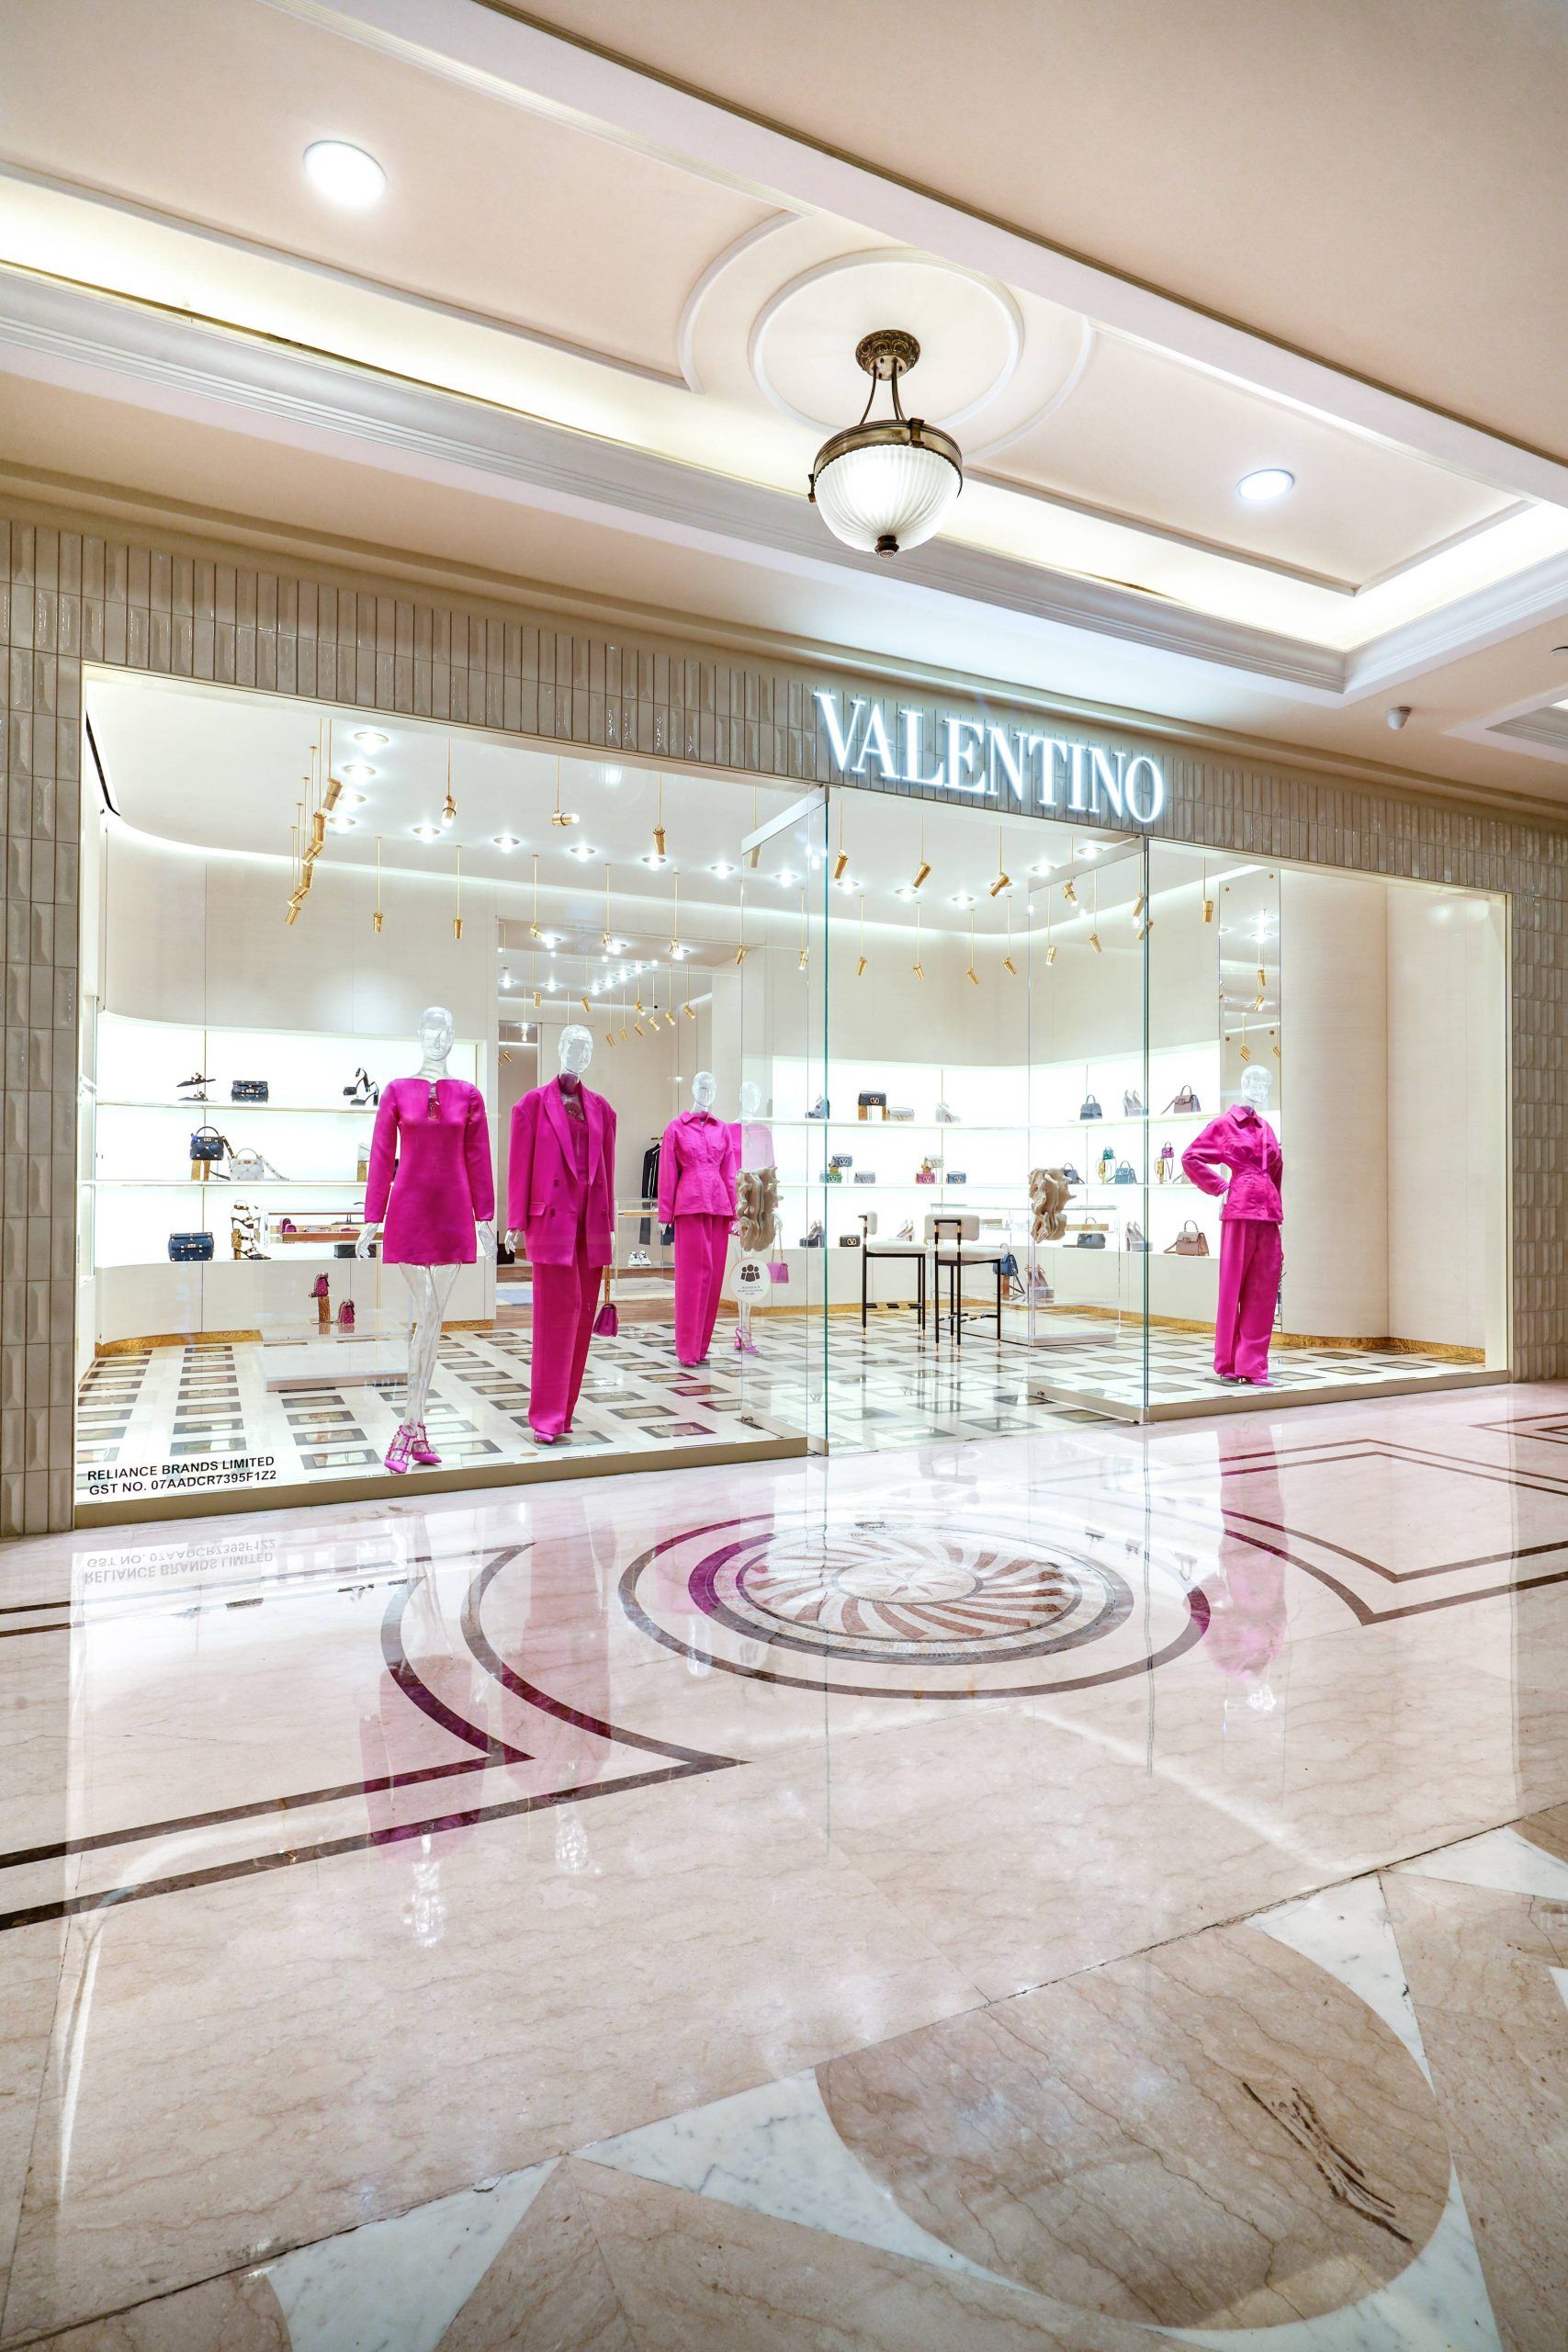 Valentino Is Now Open - Events